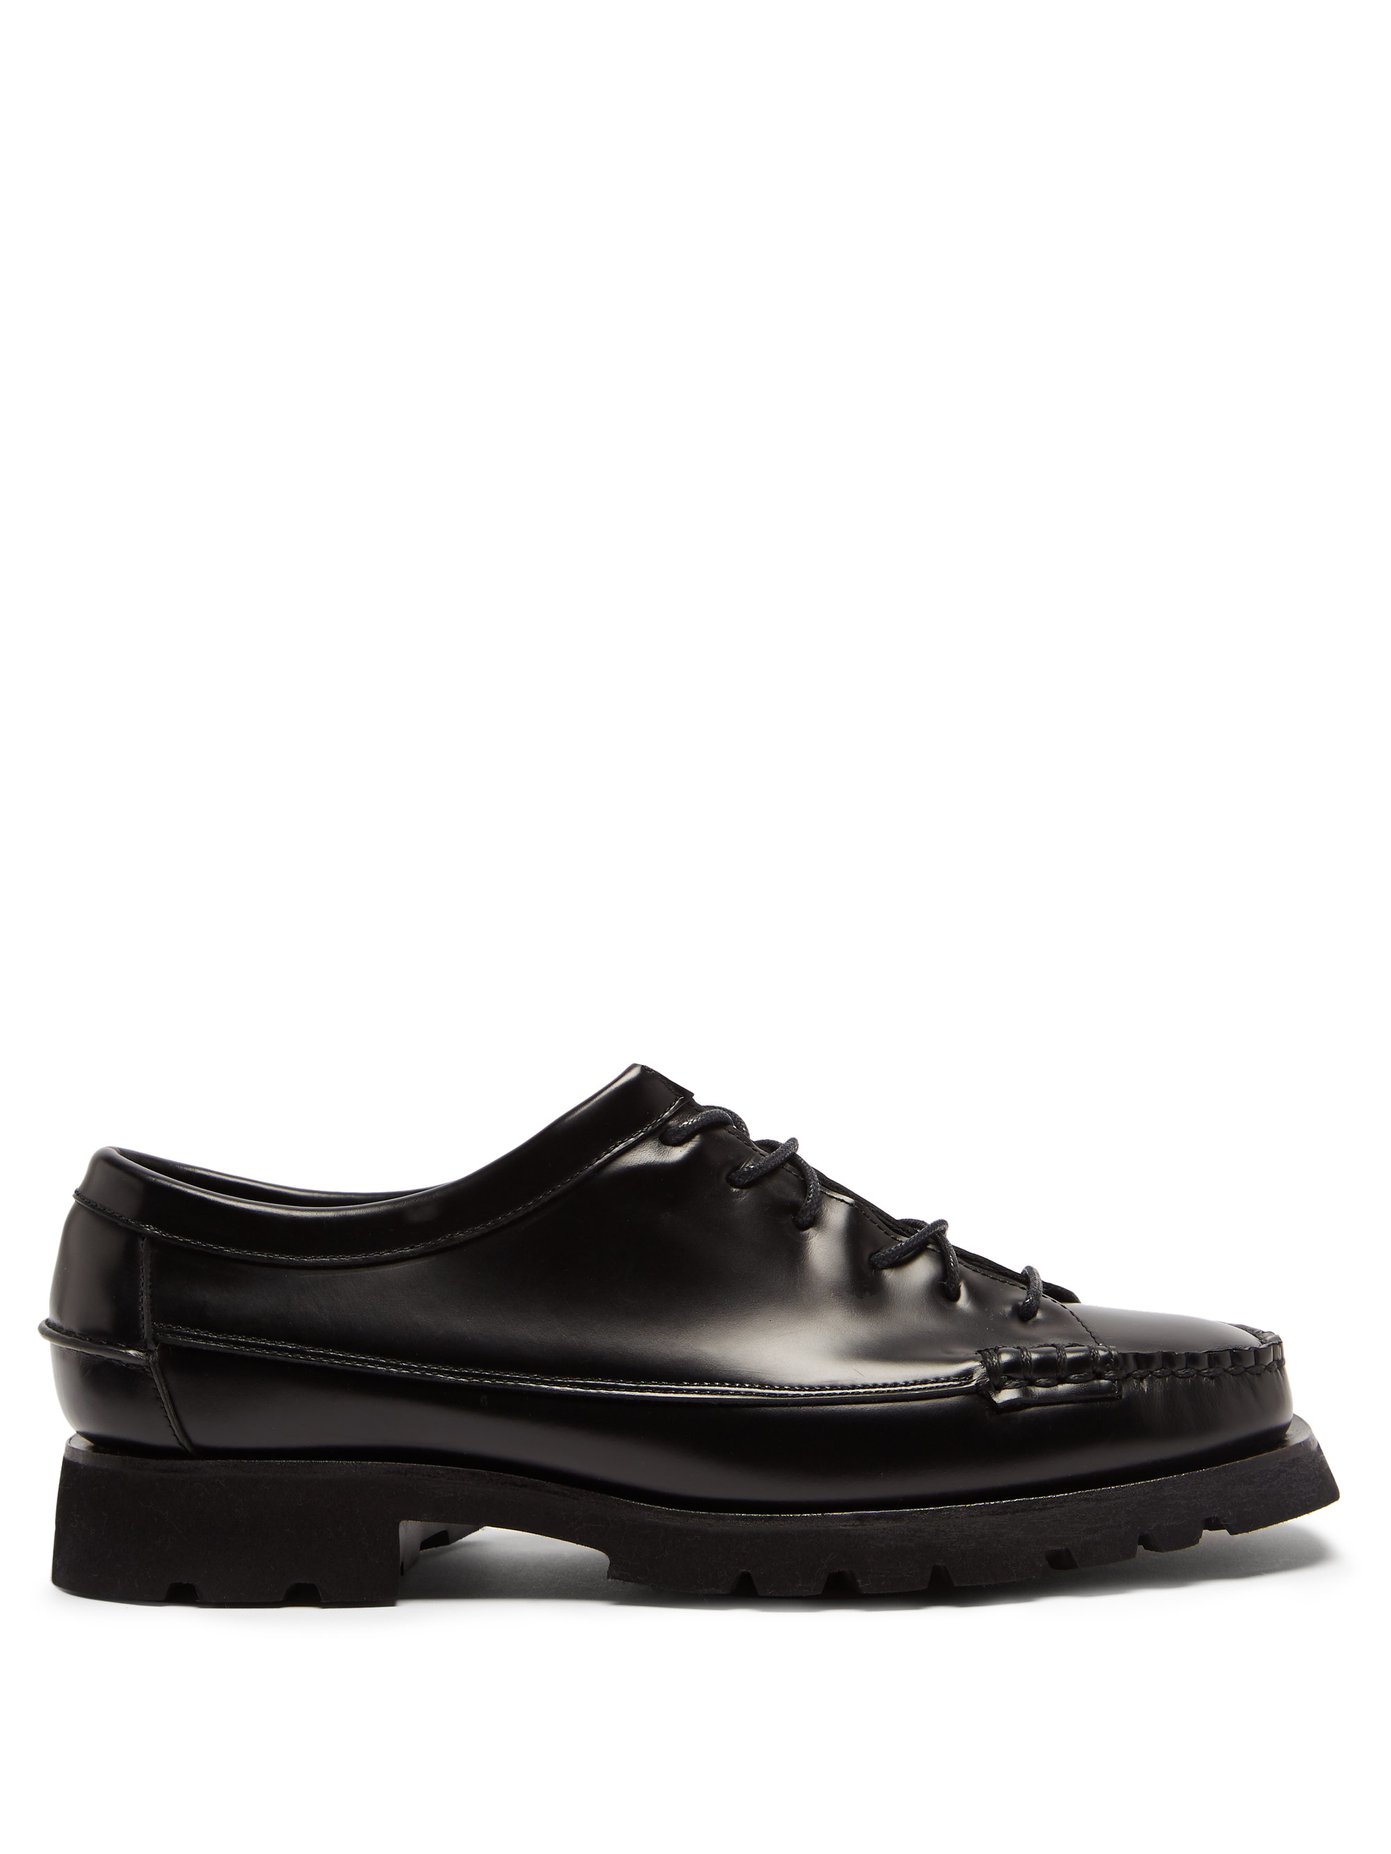 dress shoes with sport sole